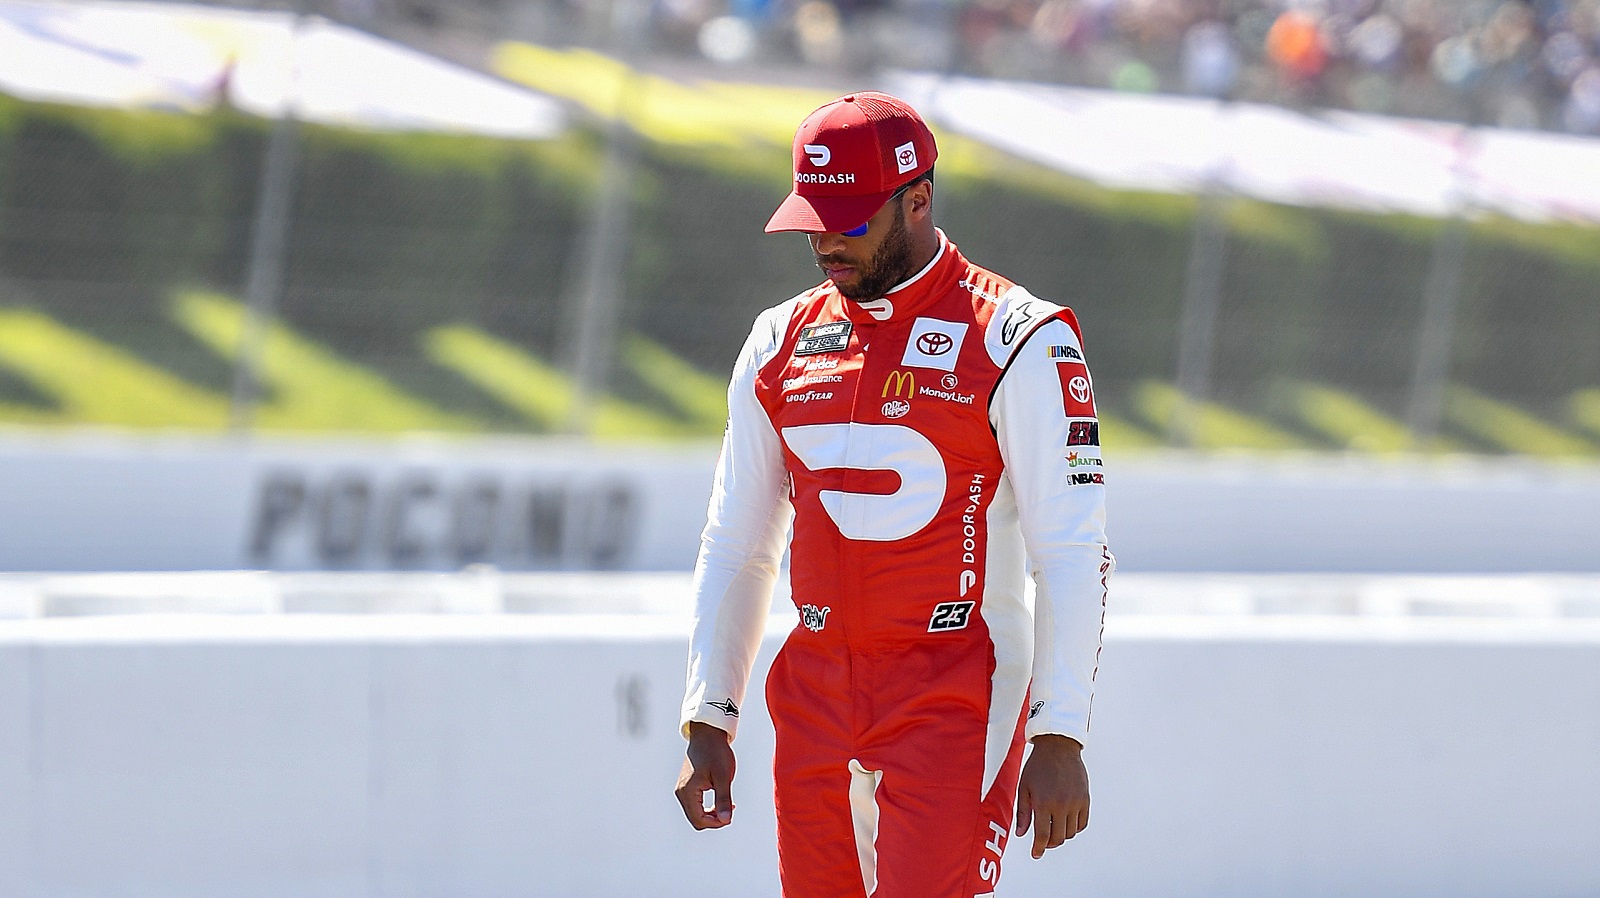 Bubba Wallace walks the grid during qualifying for the NASCAR Cup Series M&M's Fan Appreciation 400 at Pocono Raceway on July 23, 2022.